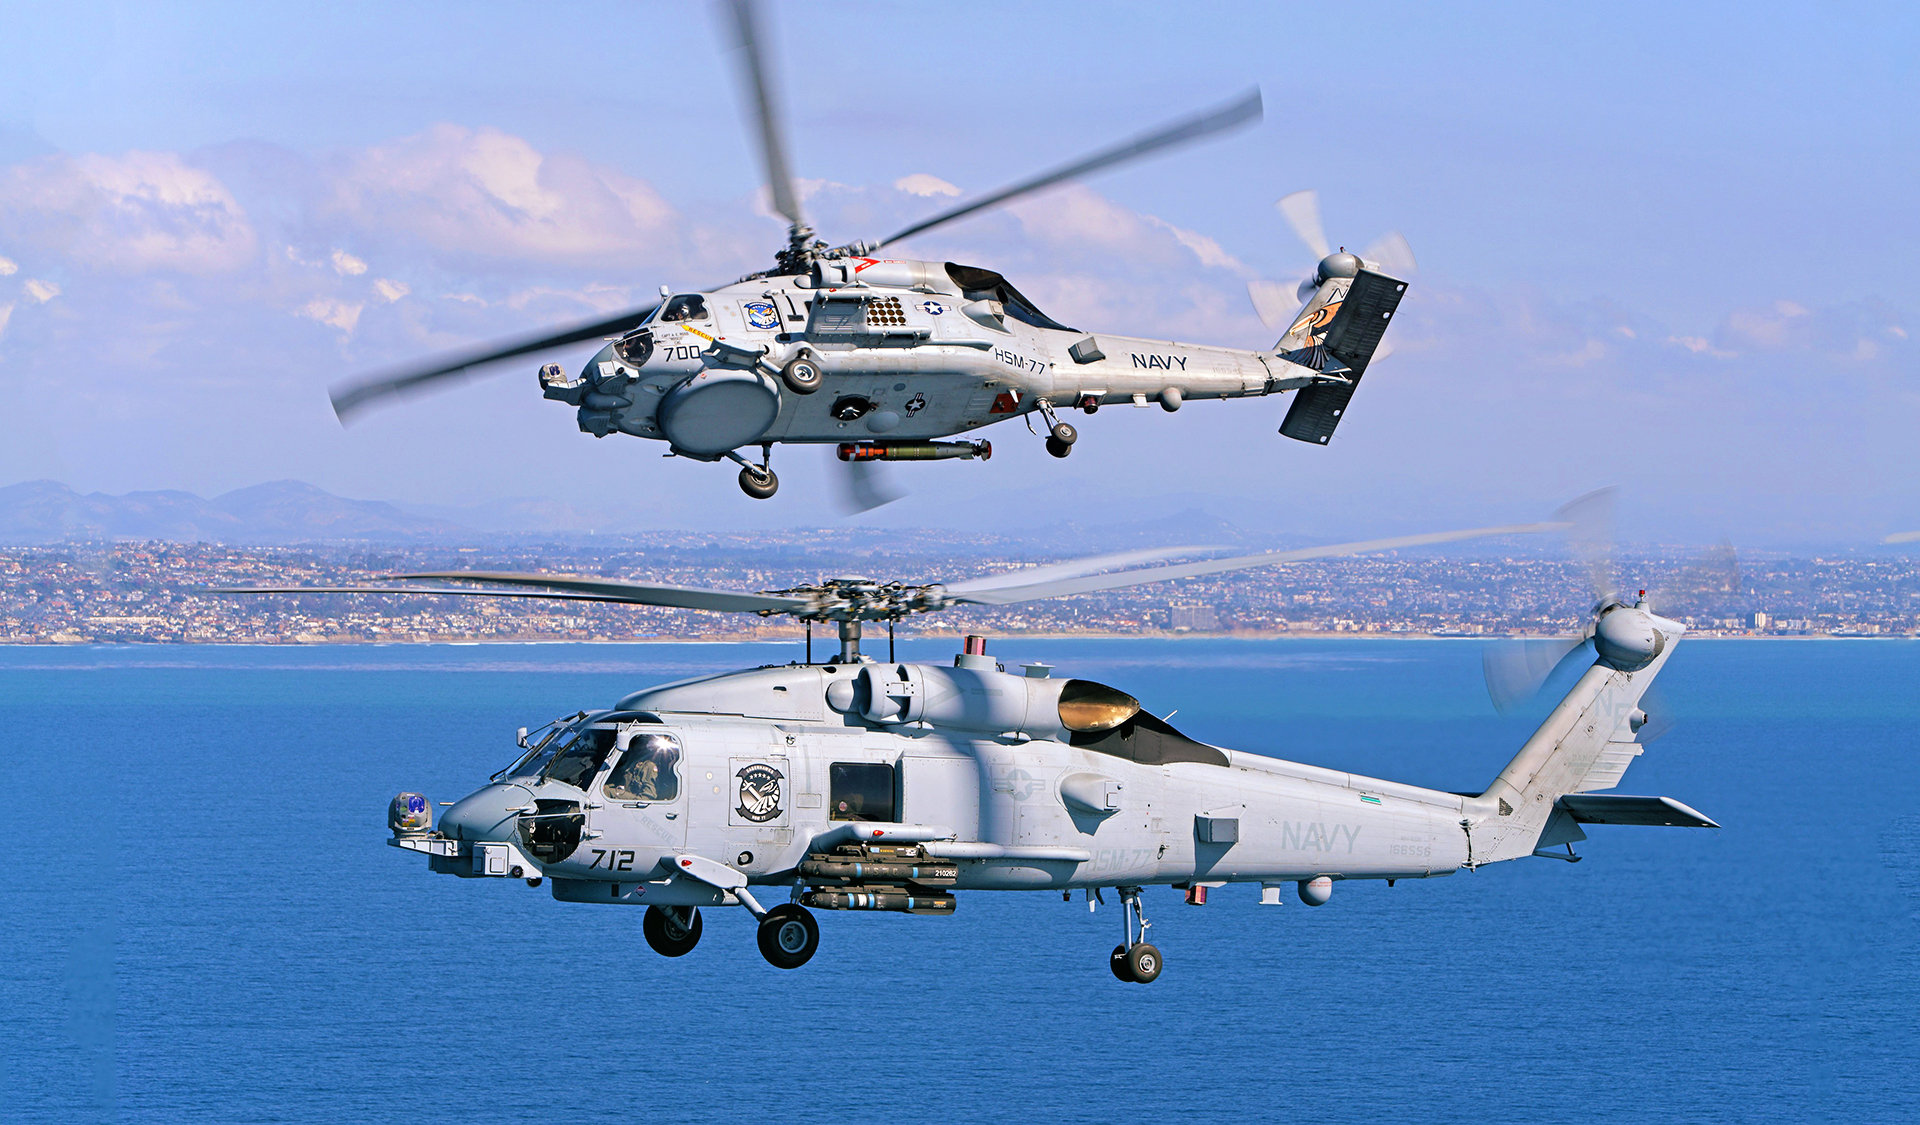 South Korea Selects MH-60R Seahawk Helicopter to Boost ROKN Anti-Submarine Capabilities